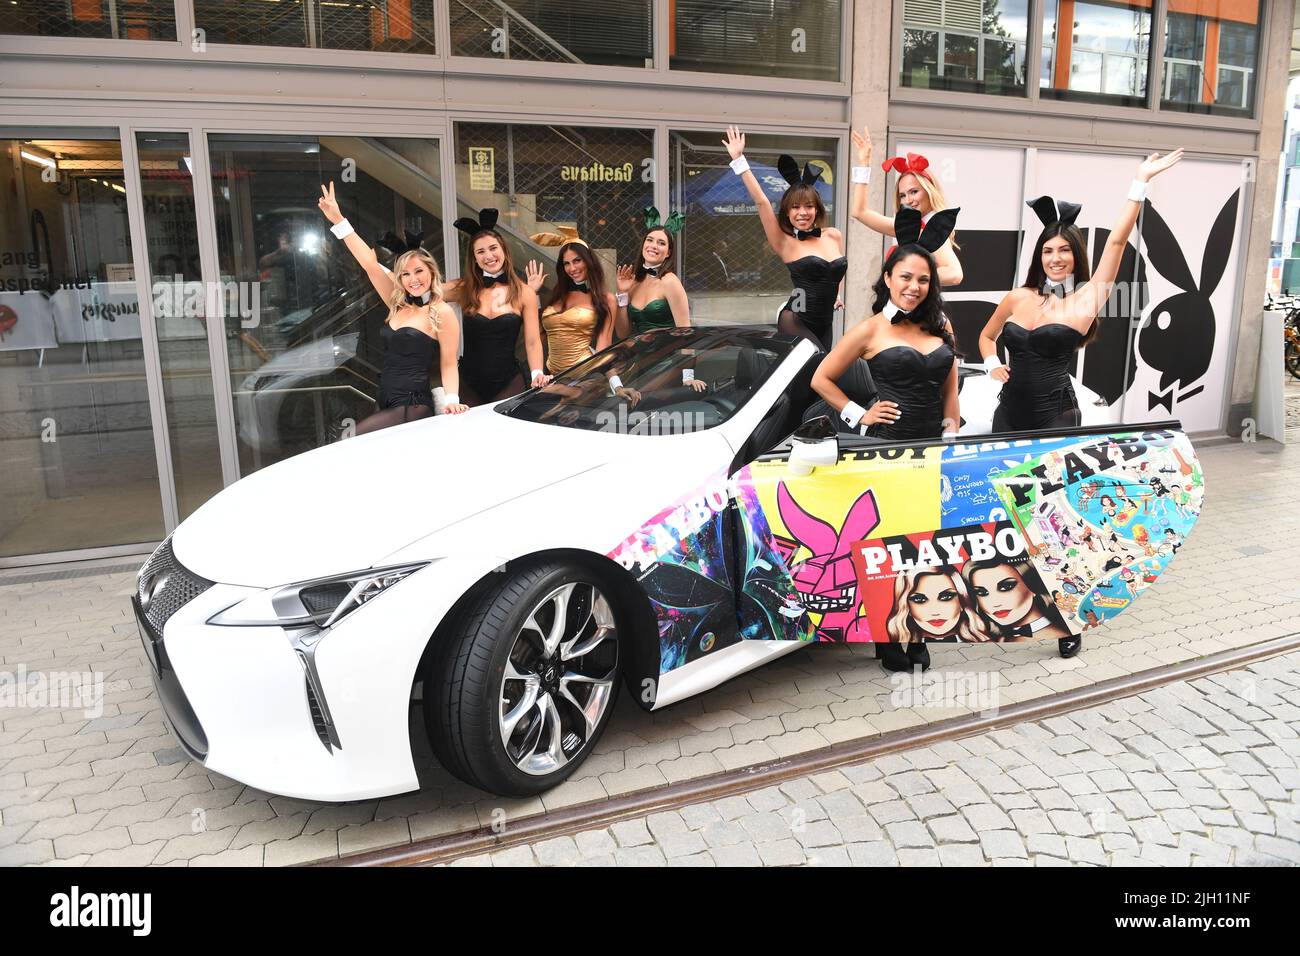 Munich, Germany. 13th July, 2022. Playboy bunnies show off on a car in front of the penthouse at Plant 12 at the '50 Years of Playboy Germany' anniversary party. Around 300 guests are expected at the anniversary celebration. Credit: Felix Hörhager/dpa/Alamy Live News Stock Photo